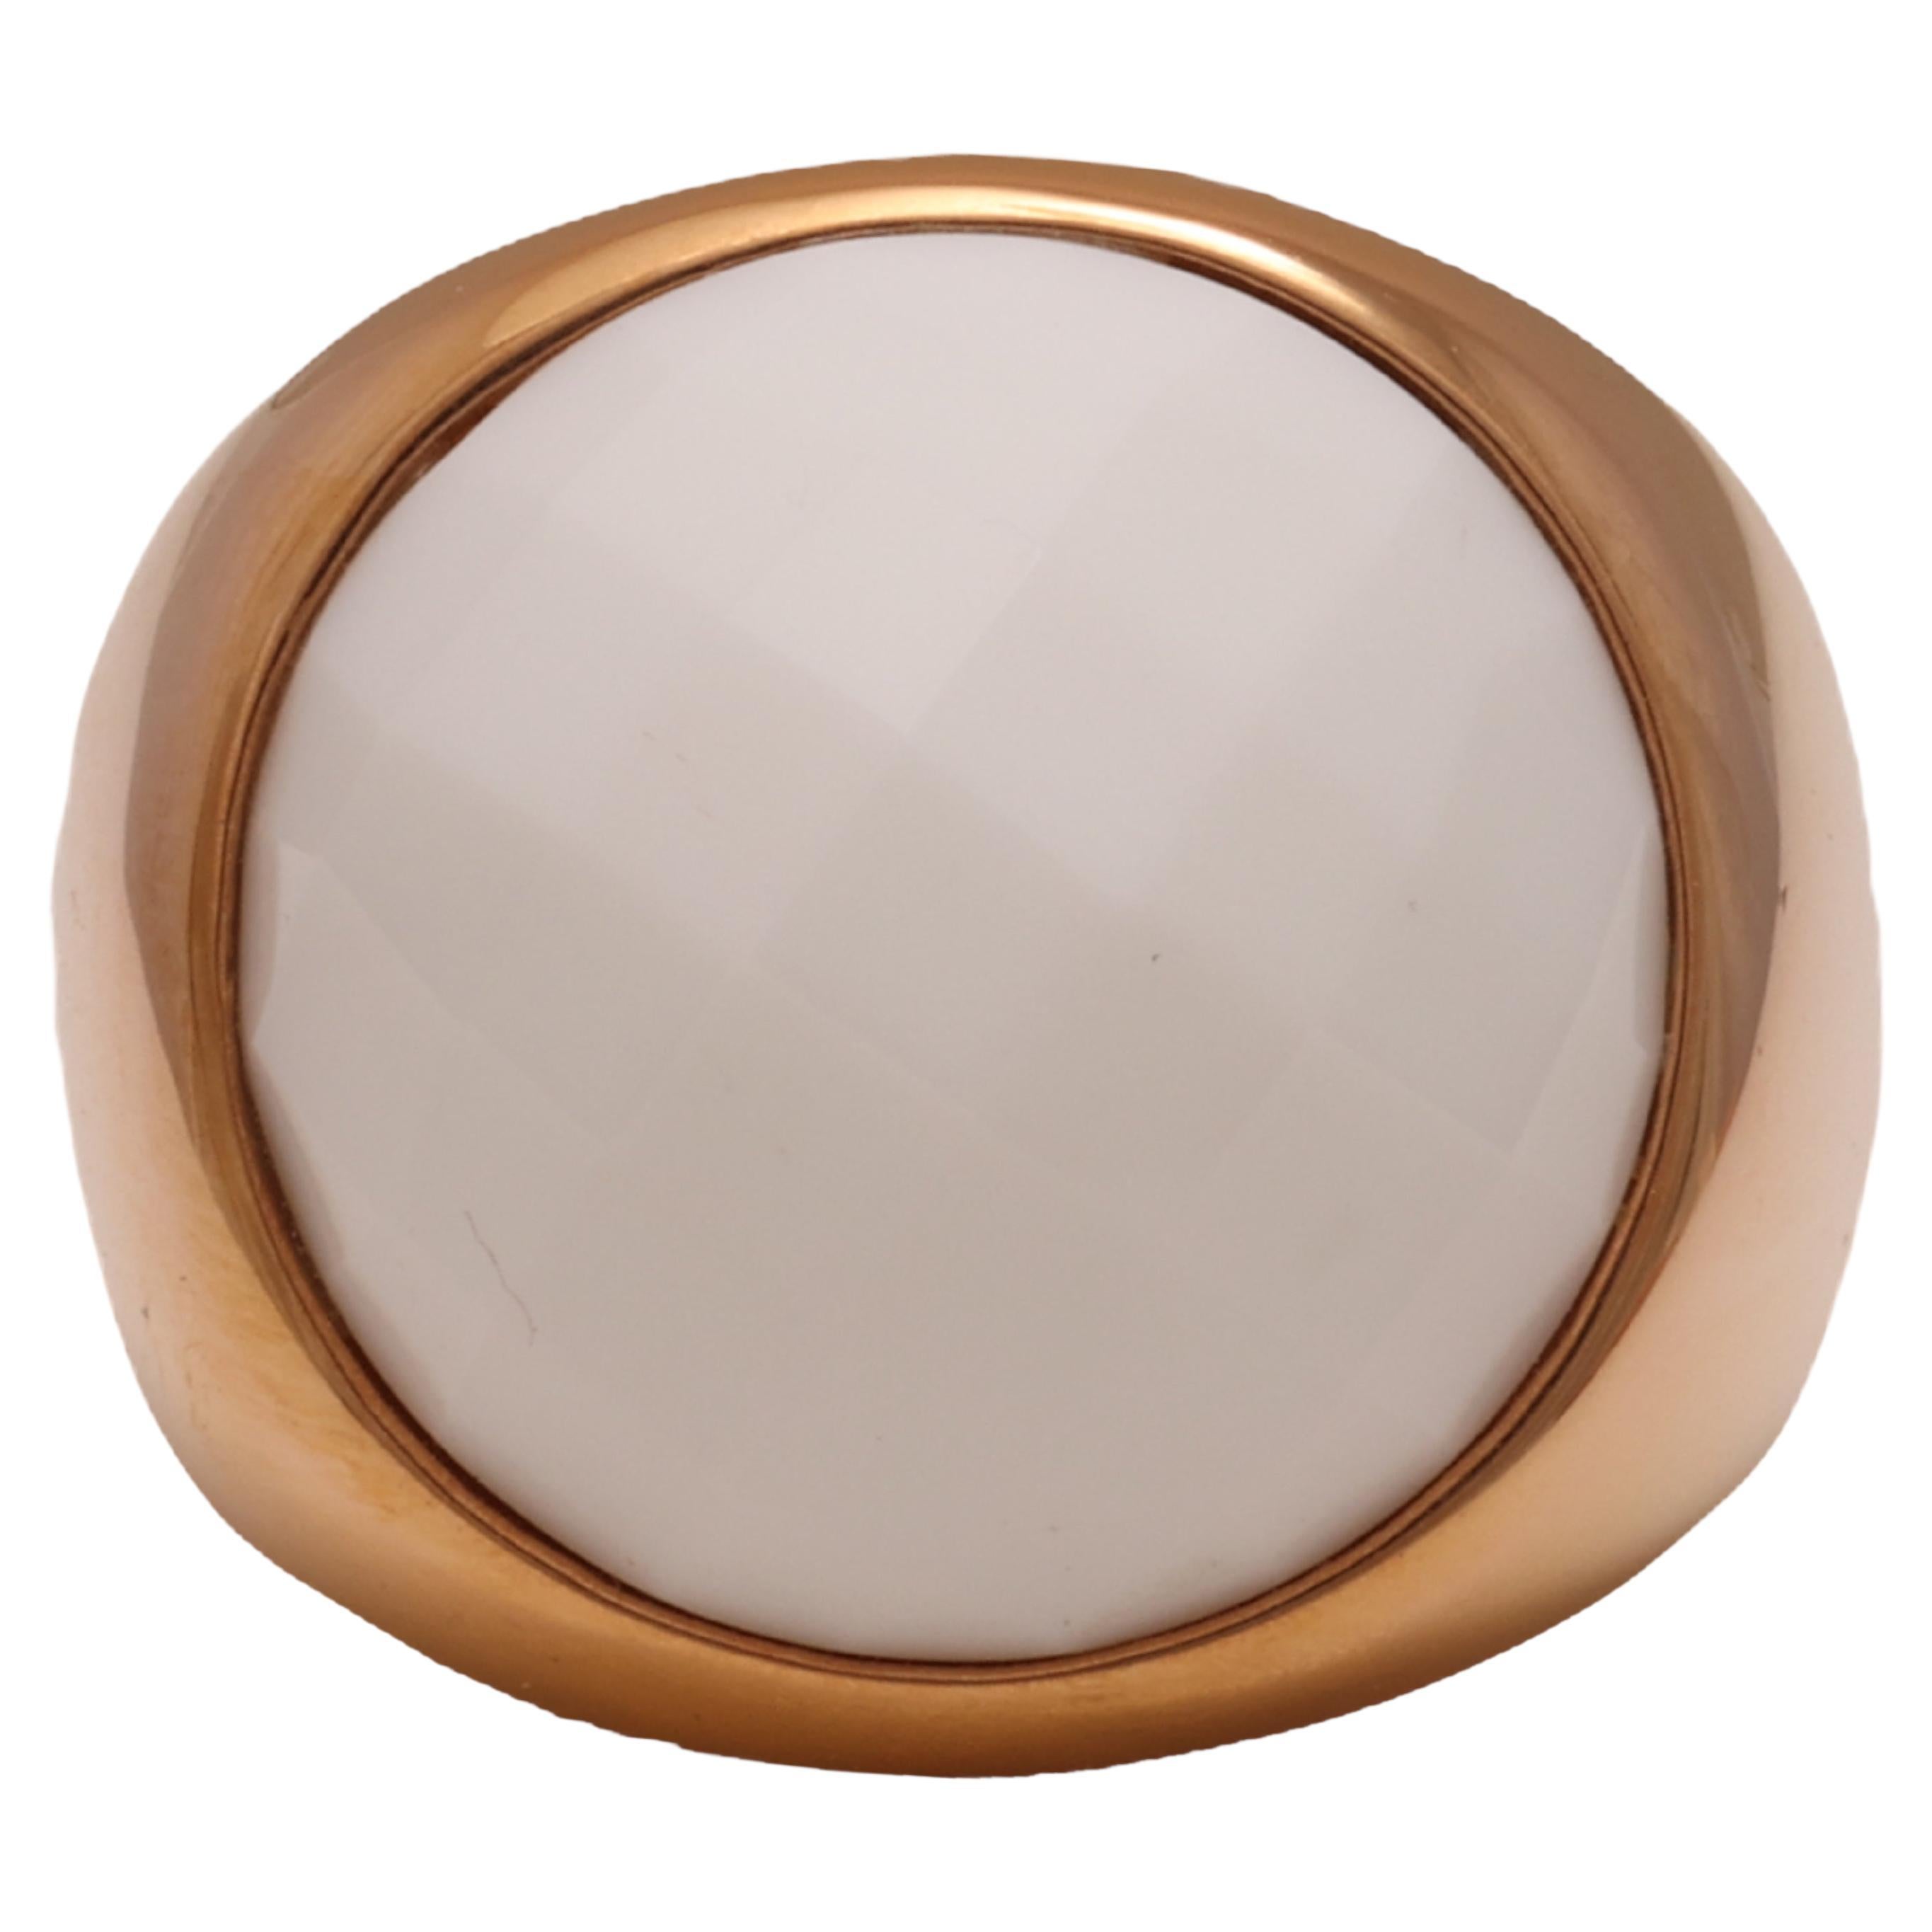 18kt. Pink Gold Ring With Round Faceted White Onyx Stone 